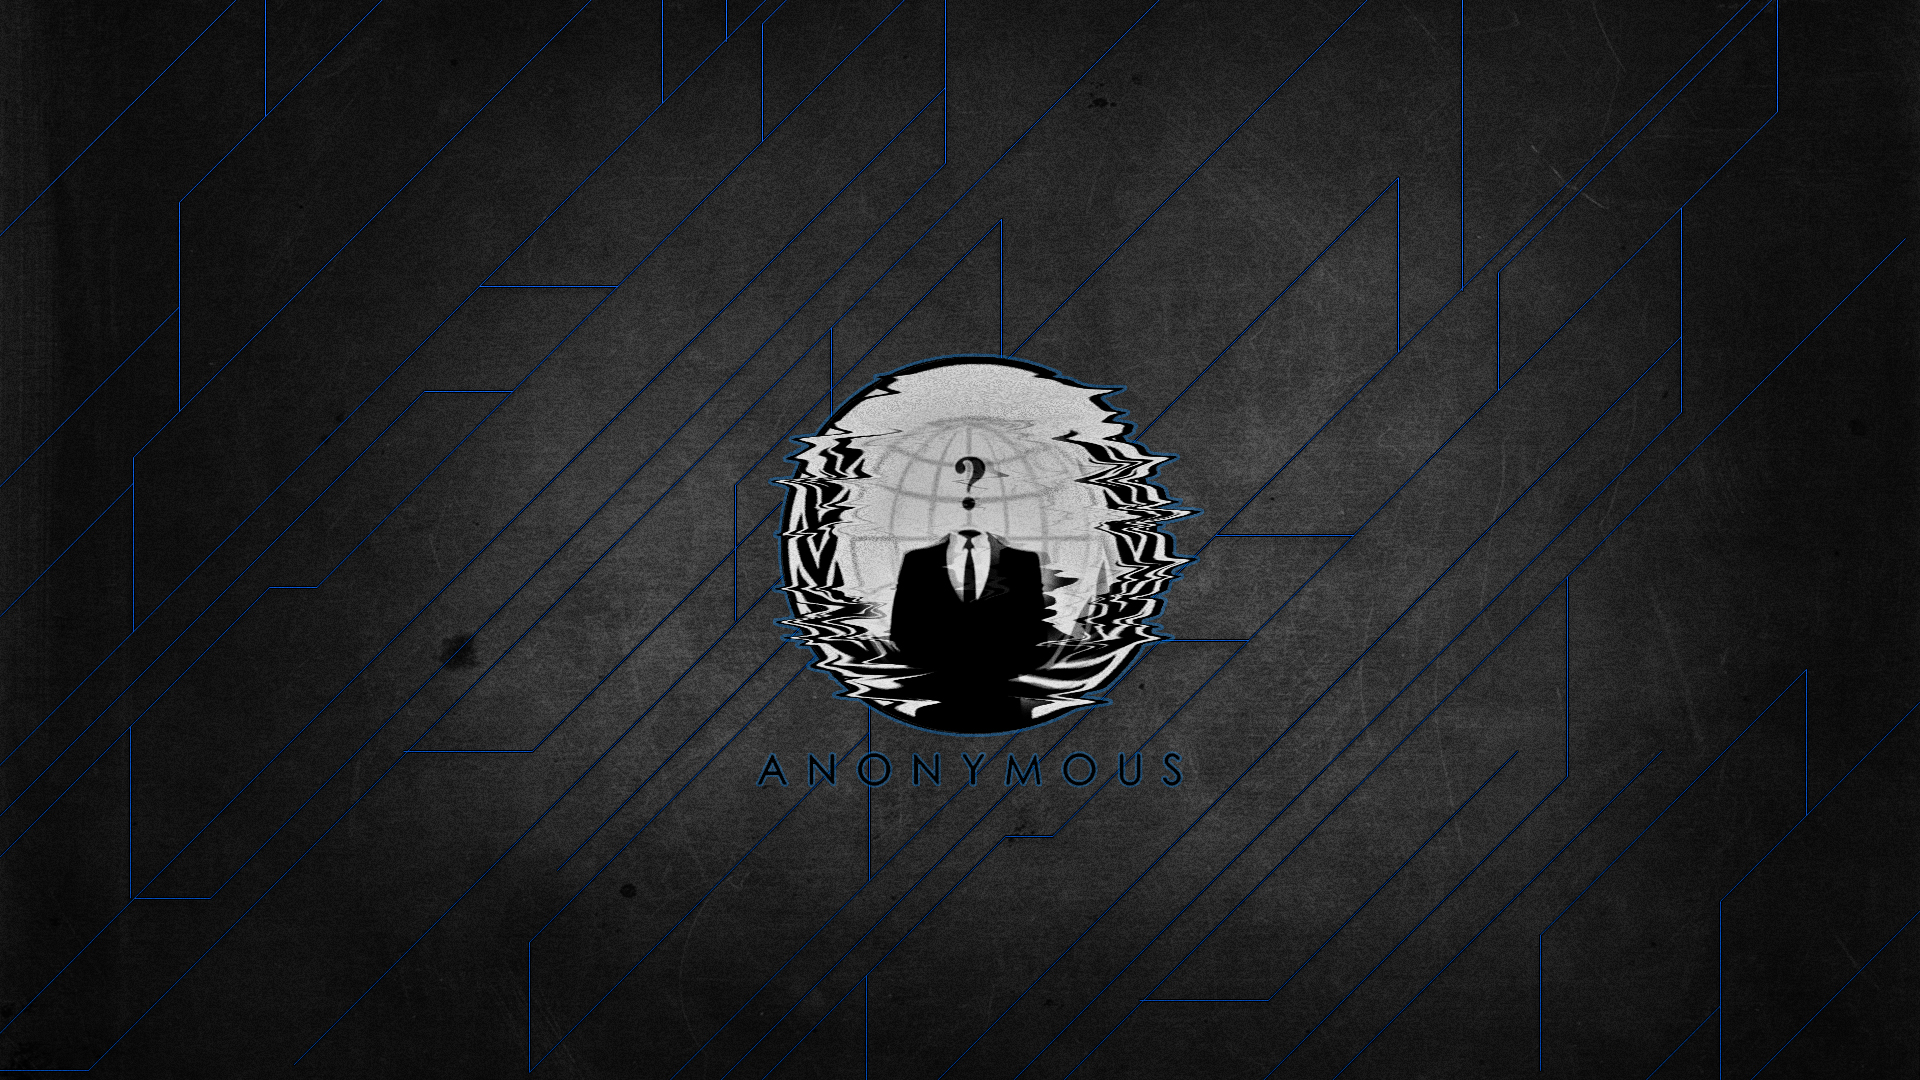 Awesome Anonymous Desktop Puter Wallpaper Brands And Logos